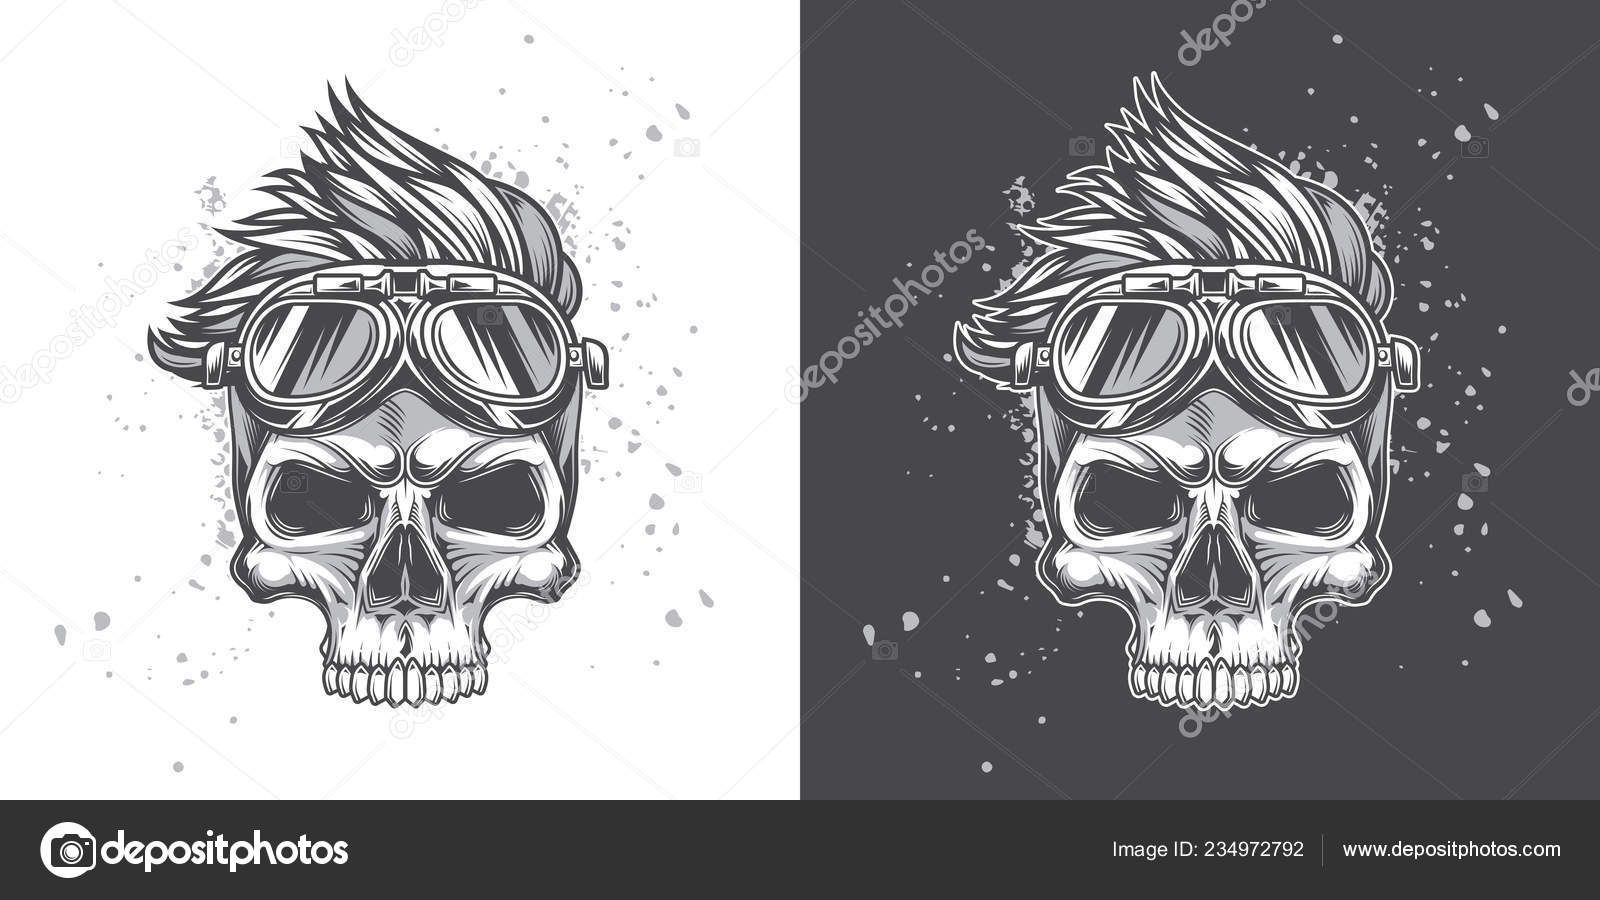 Black and White Stickers Vector Images (over 690,000)